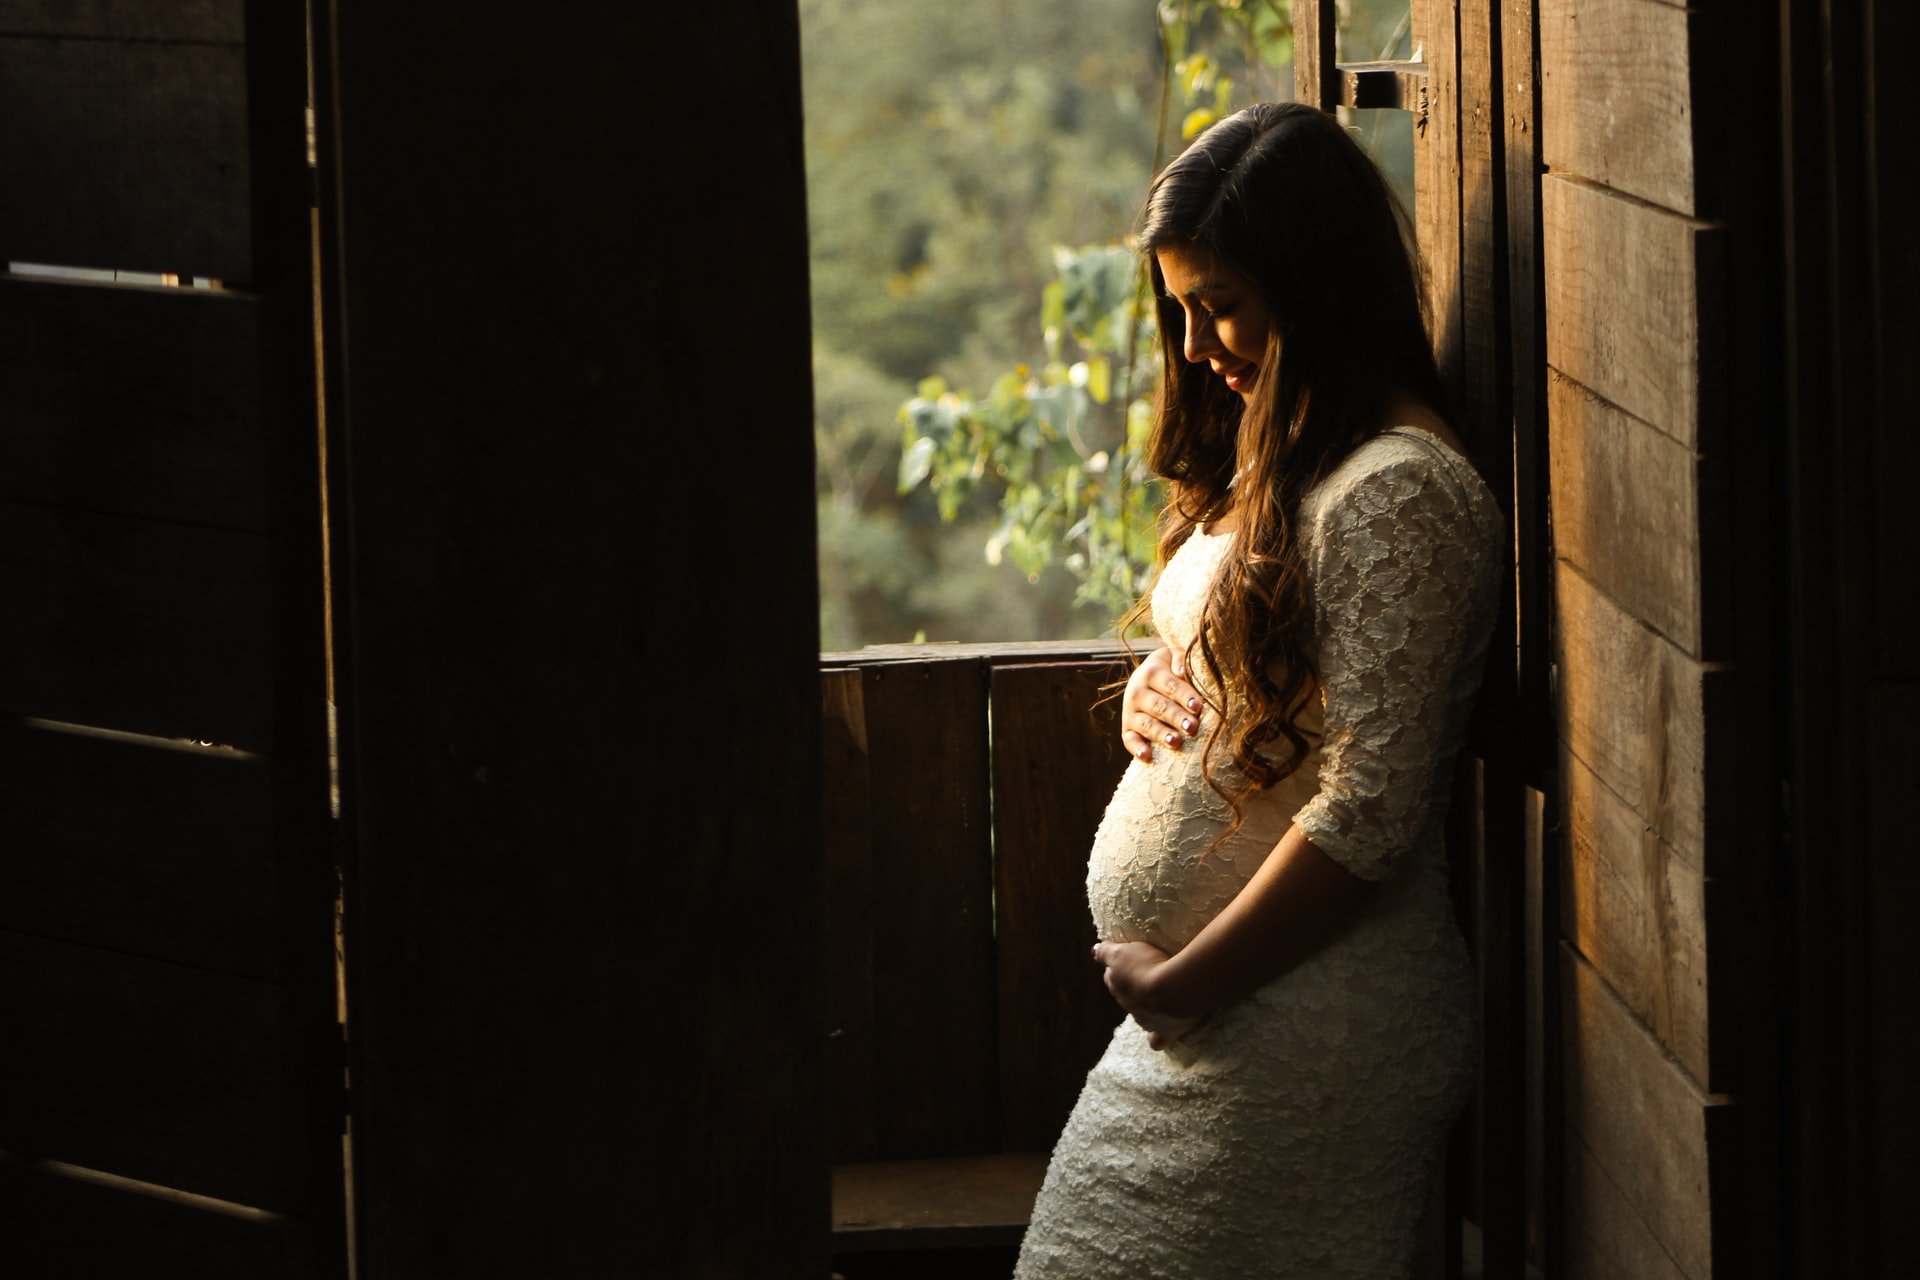 Pregnant girl with hands on baby bump| Source: Unsplash